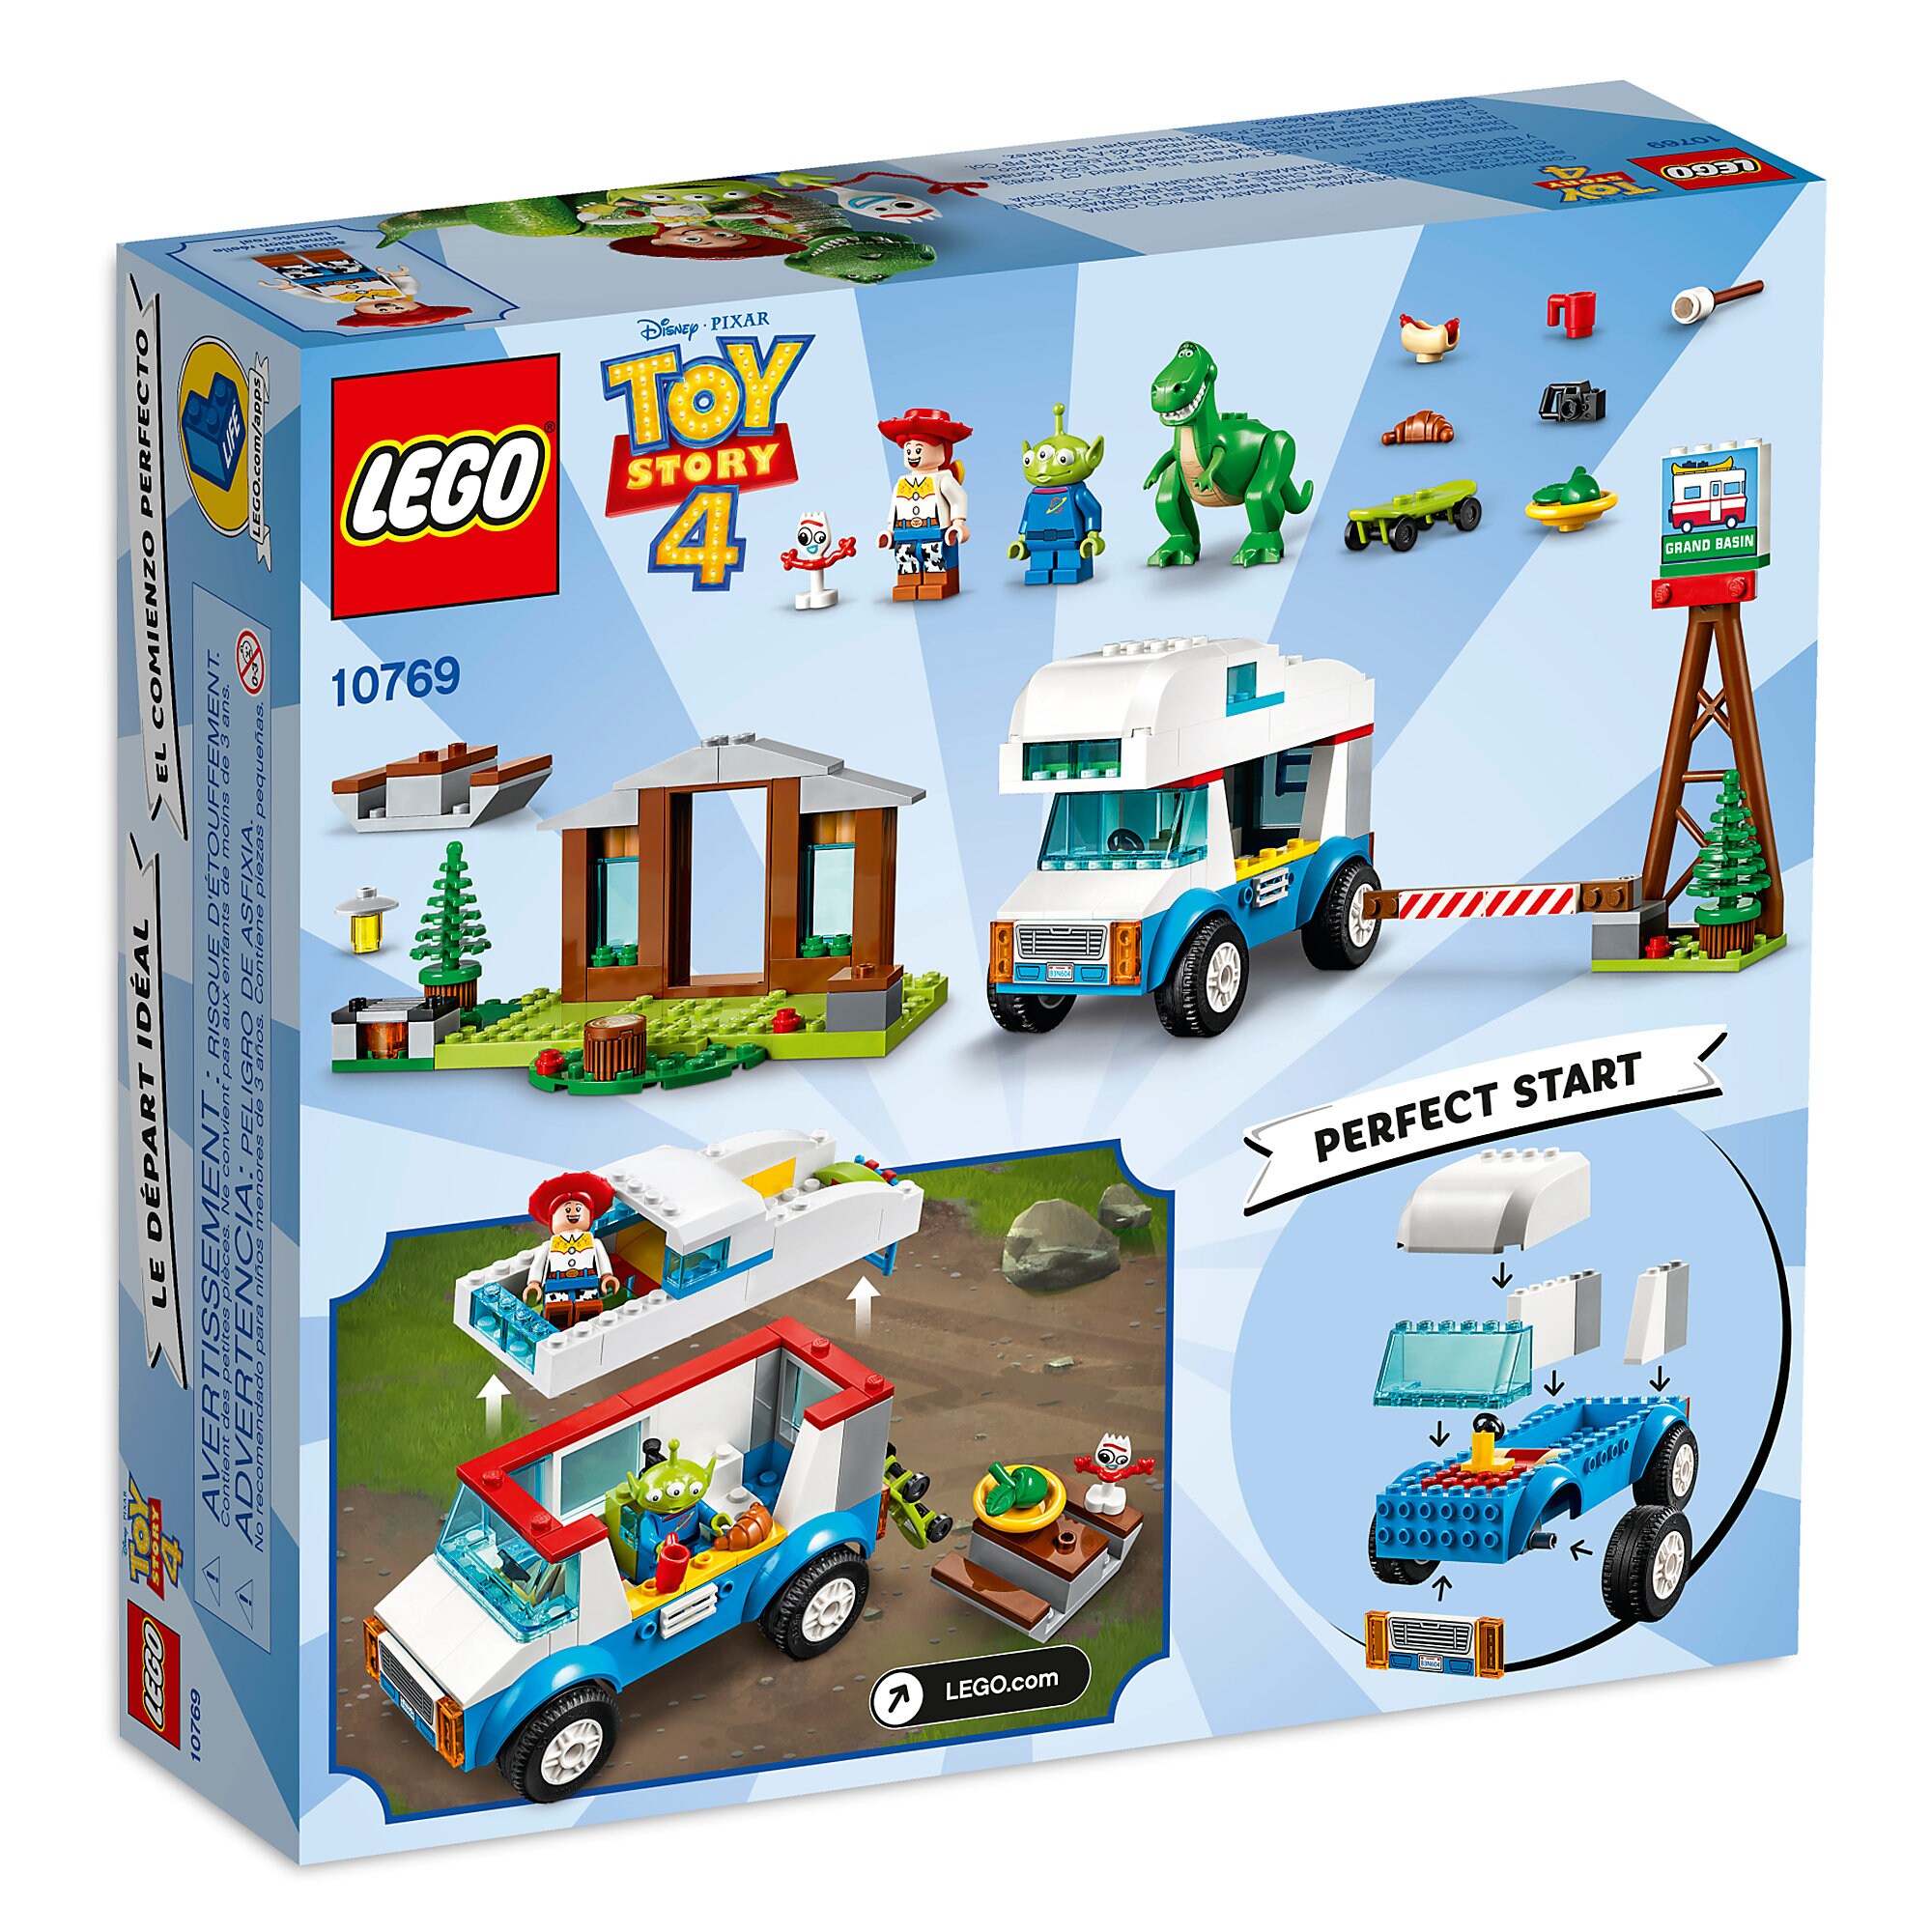 Toy Story 4 RV Vacation Play Set by LEGO